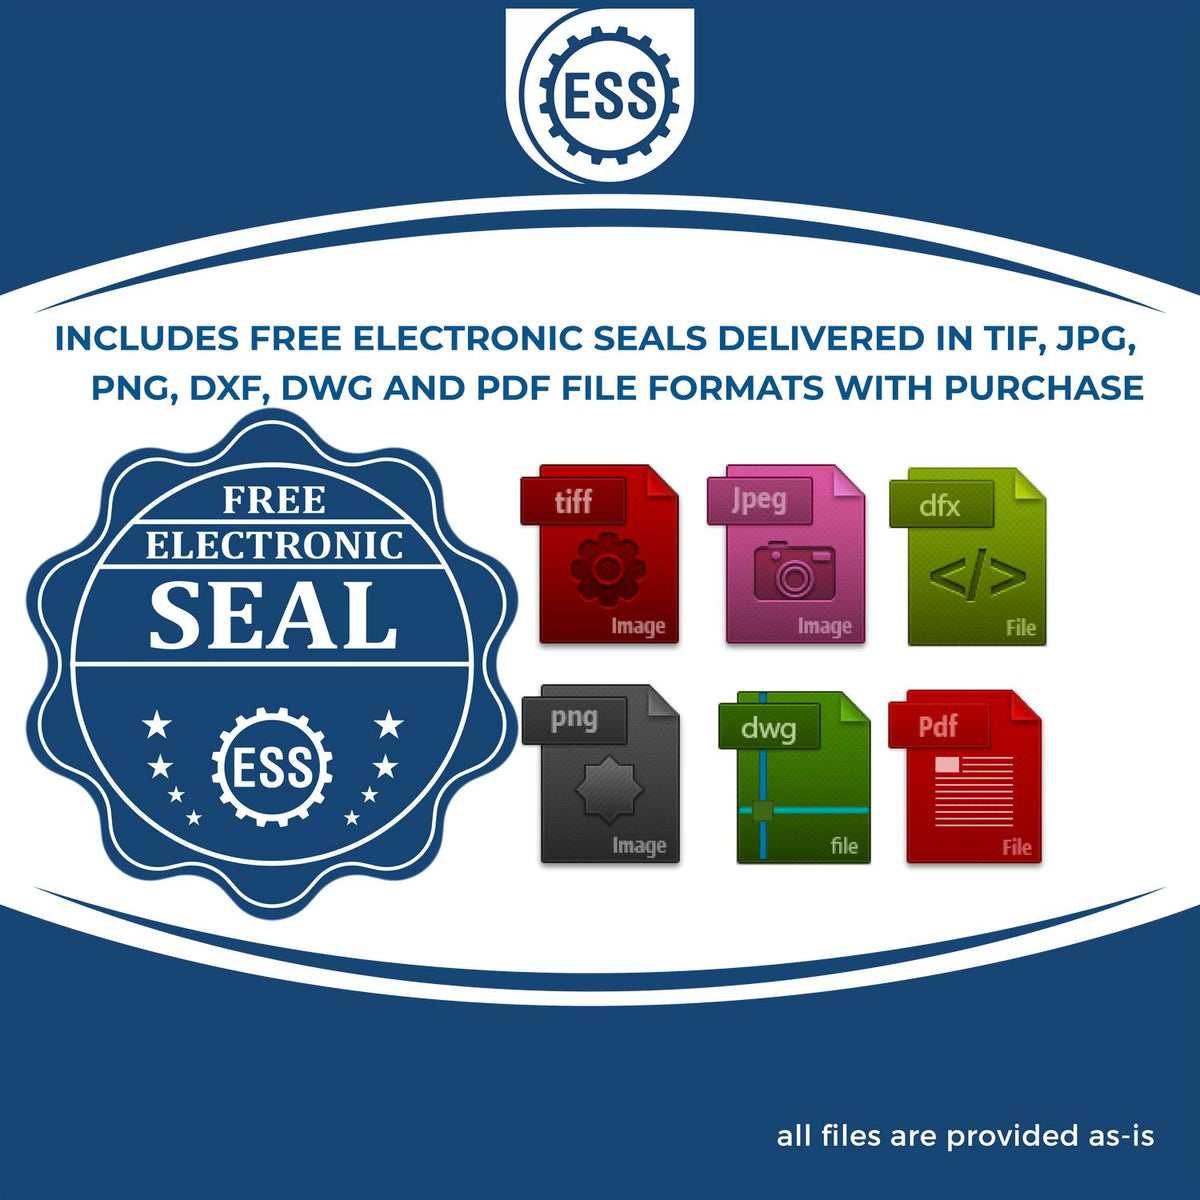 An infographic for the free electronic seal for the Hybrid Vermont Architect Seal illustrating the different file type icons such as DXF, DWG, TIF, JPG and PNG.